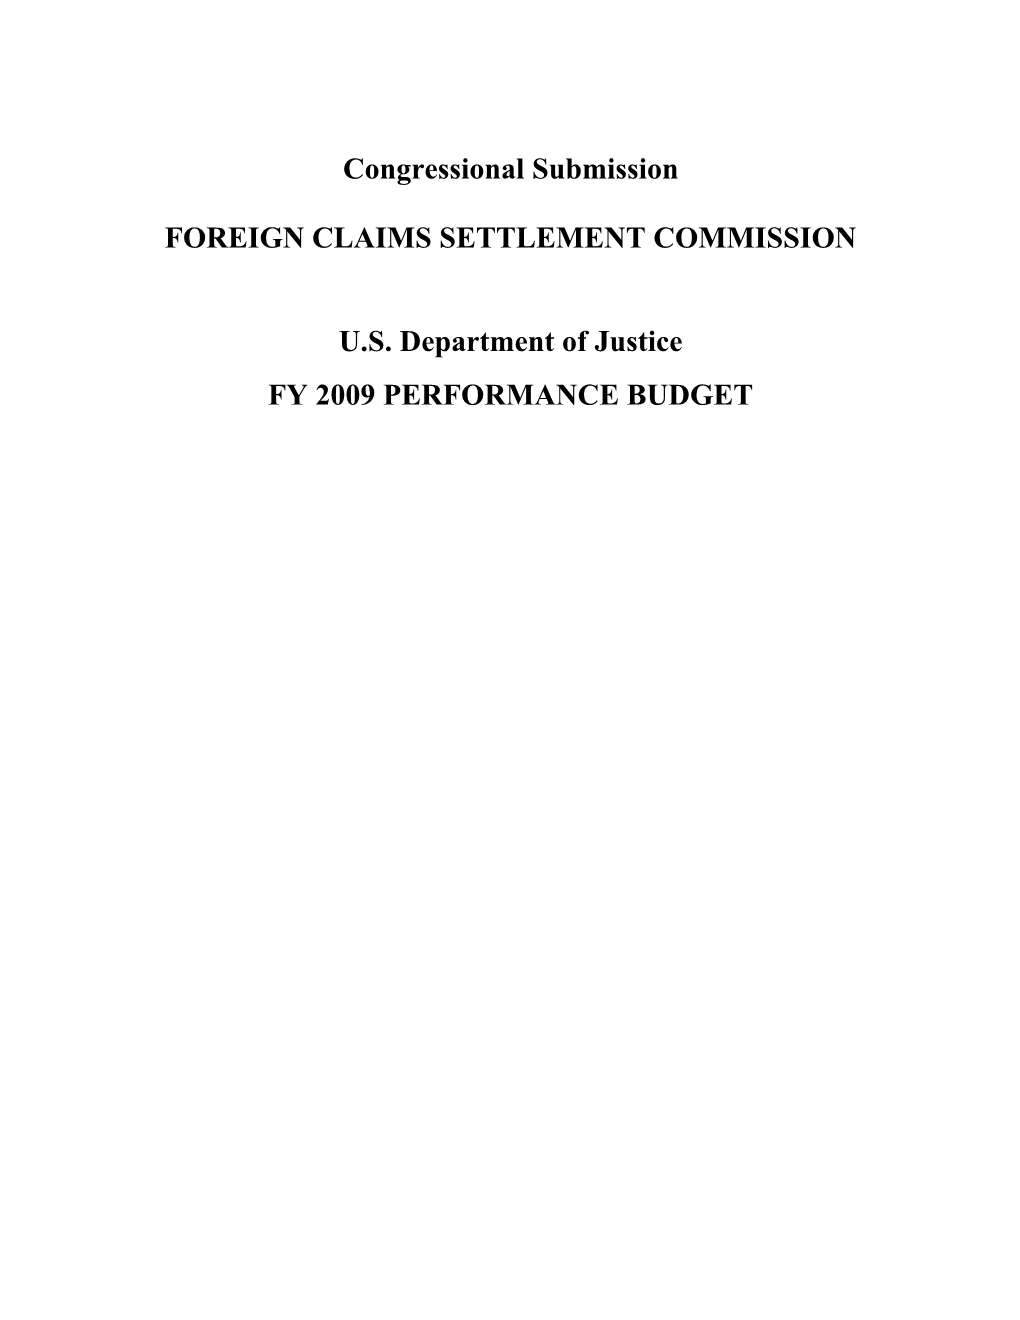 Foreign Claims Settlement Commission